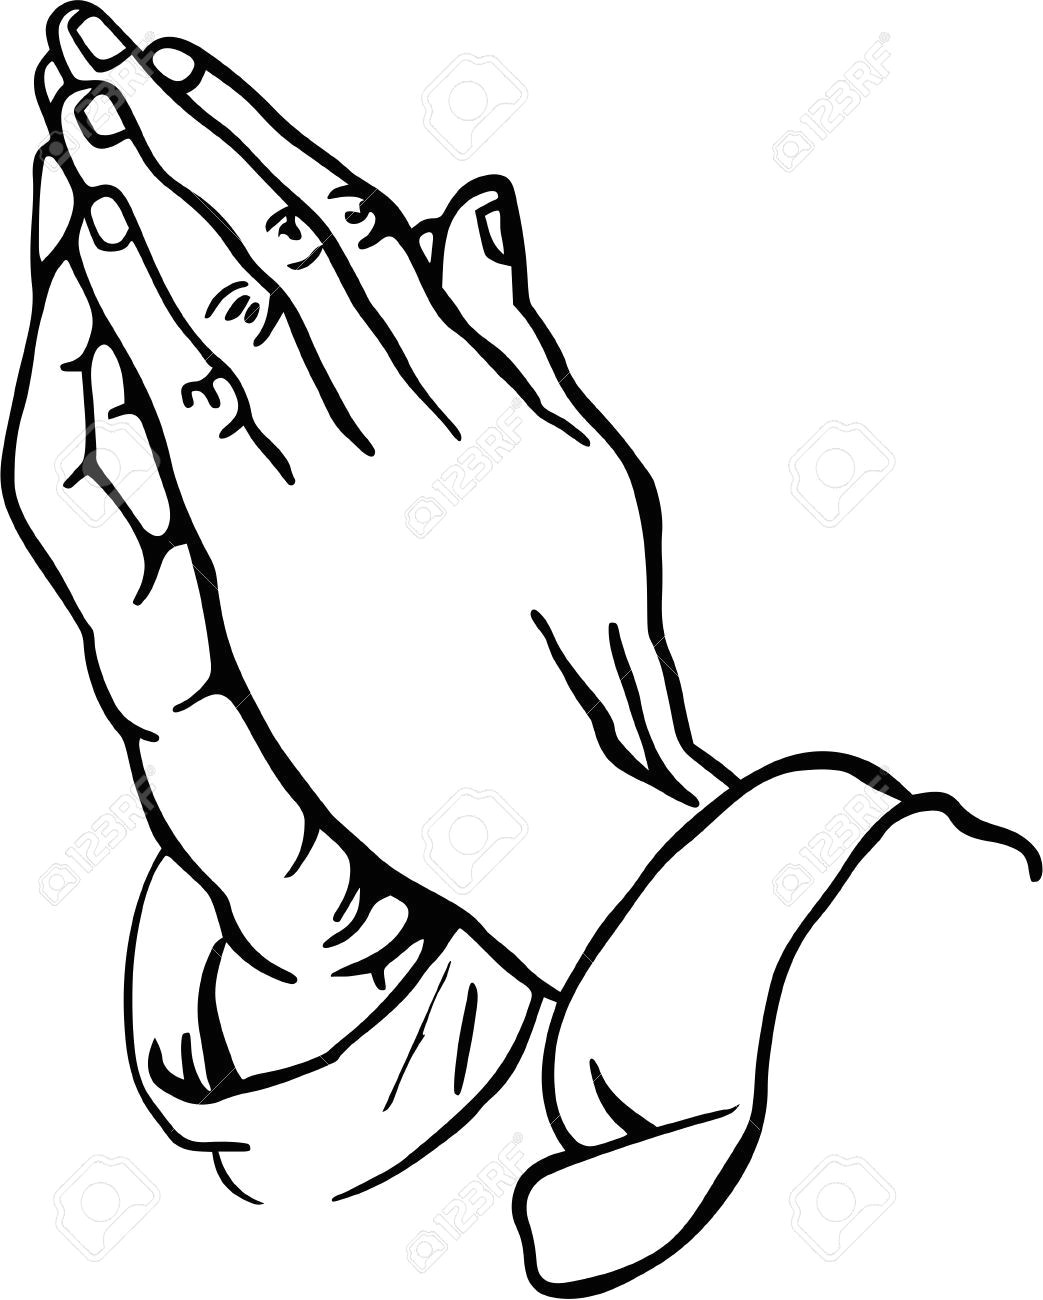 praying hands clipart stock photo picture and royalty free image